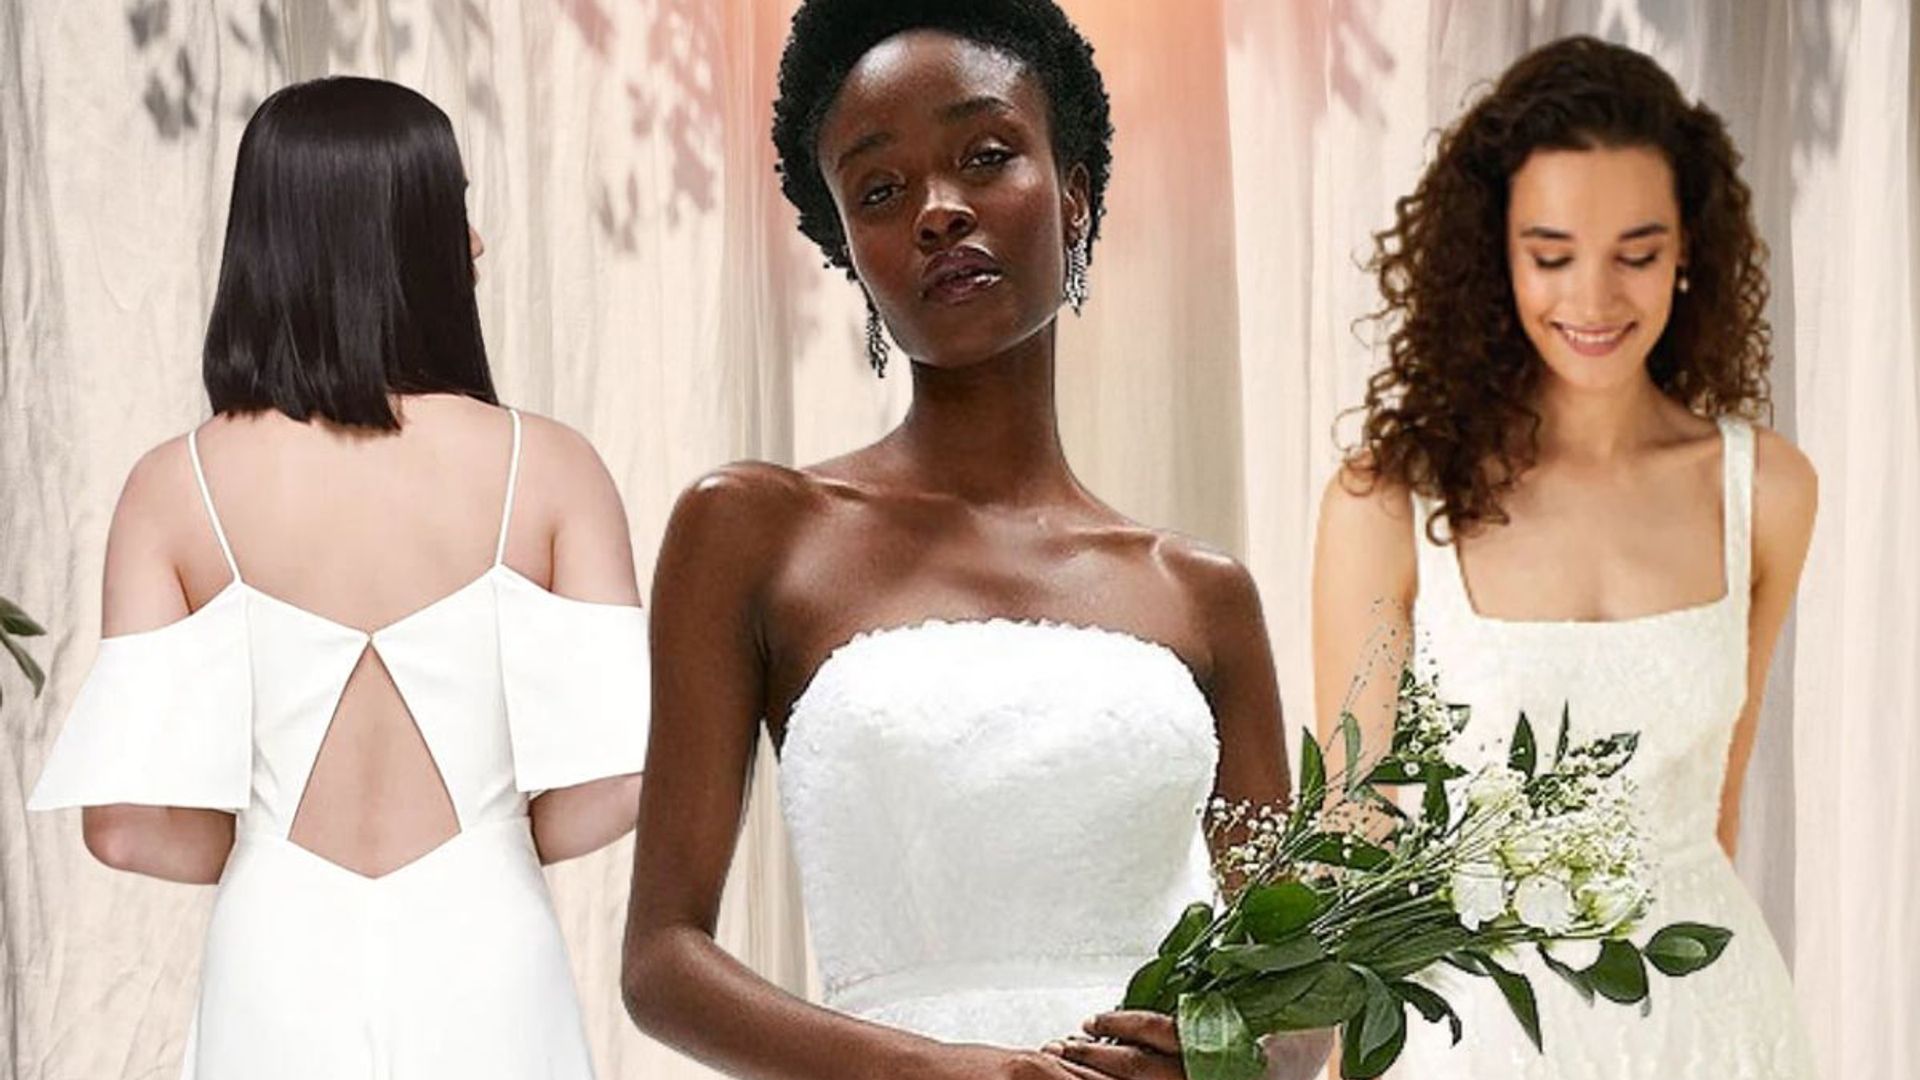 35 high street wedding dresses for 2022: Cheap but stylish gowns from ASOS,  Monsoon, H&M & more